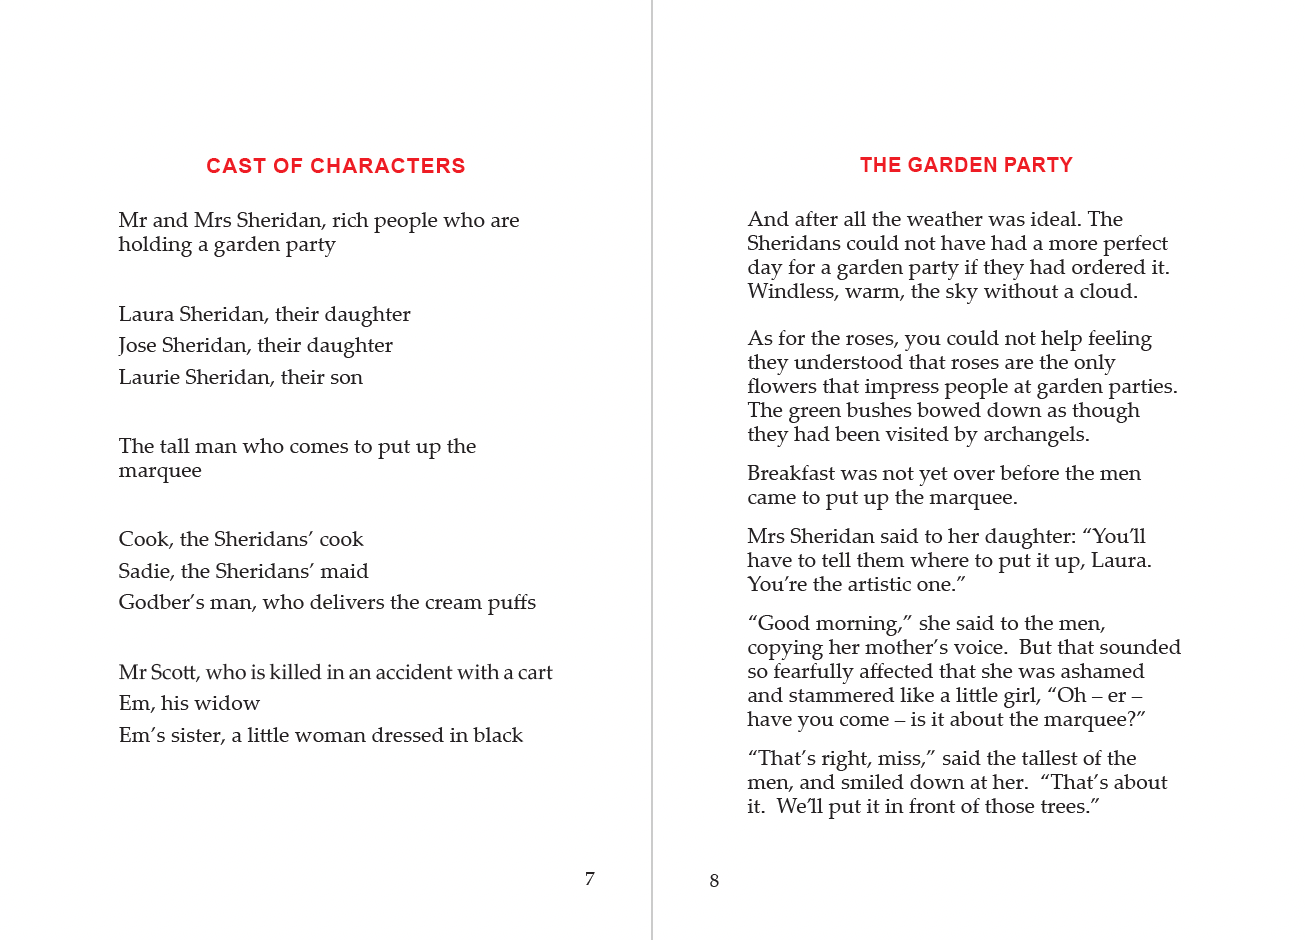 The Garden Party and The Doll's House book spread. Pgs 7-8, a Cast of Characters and The Garden Party chapter